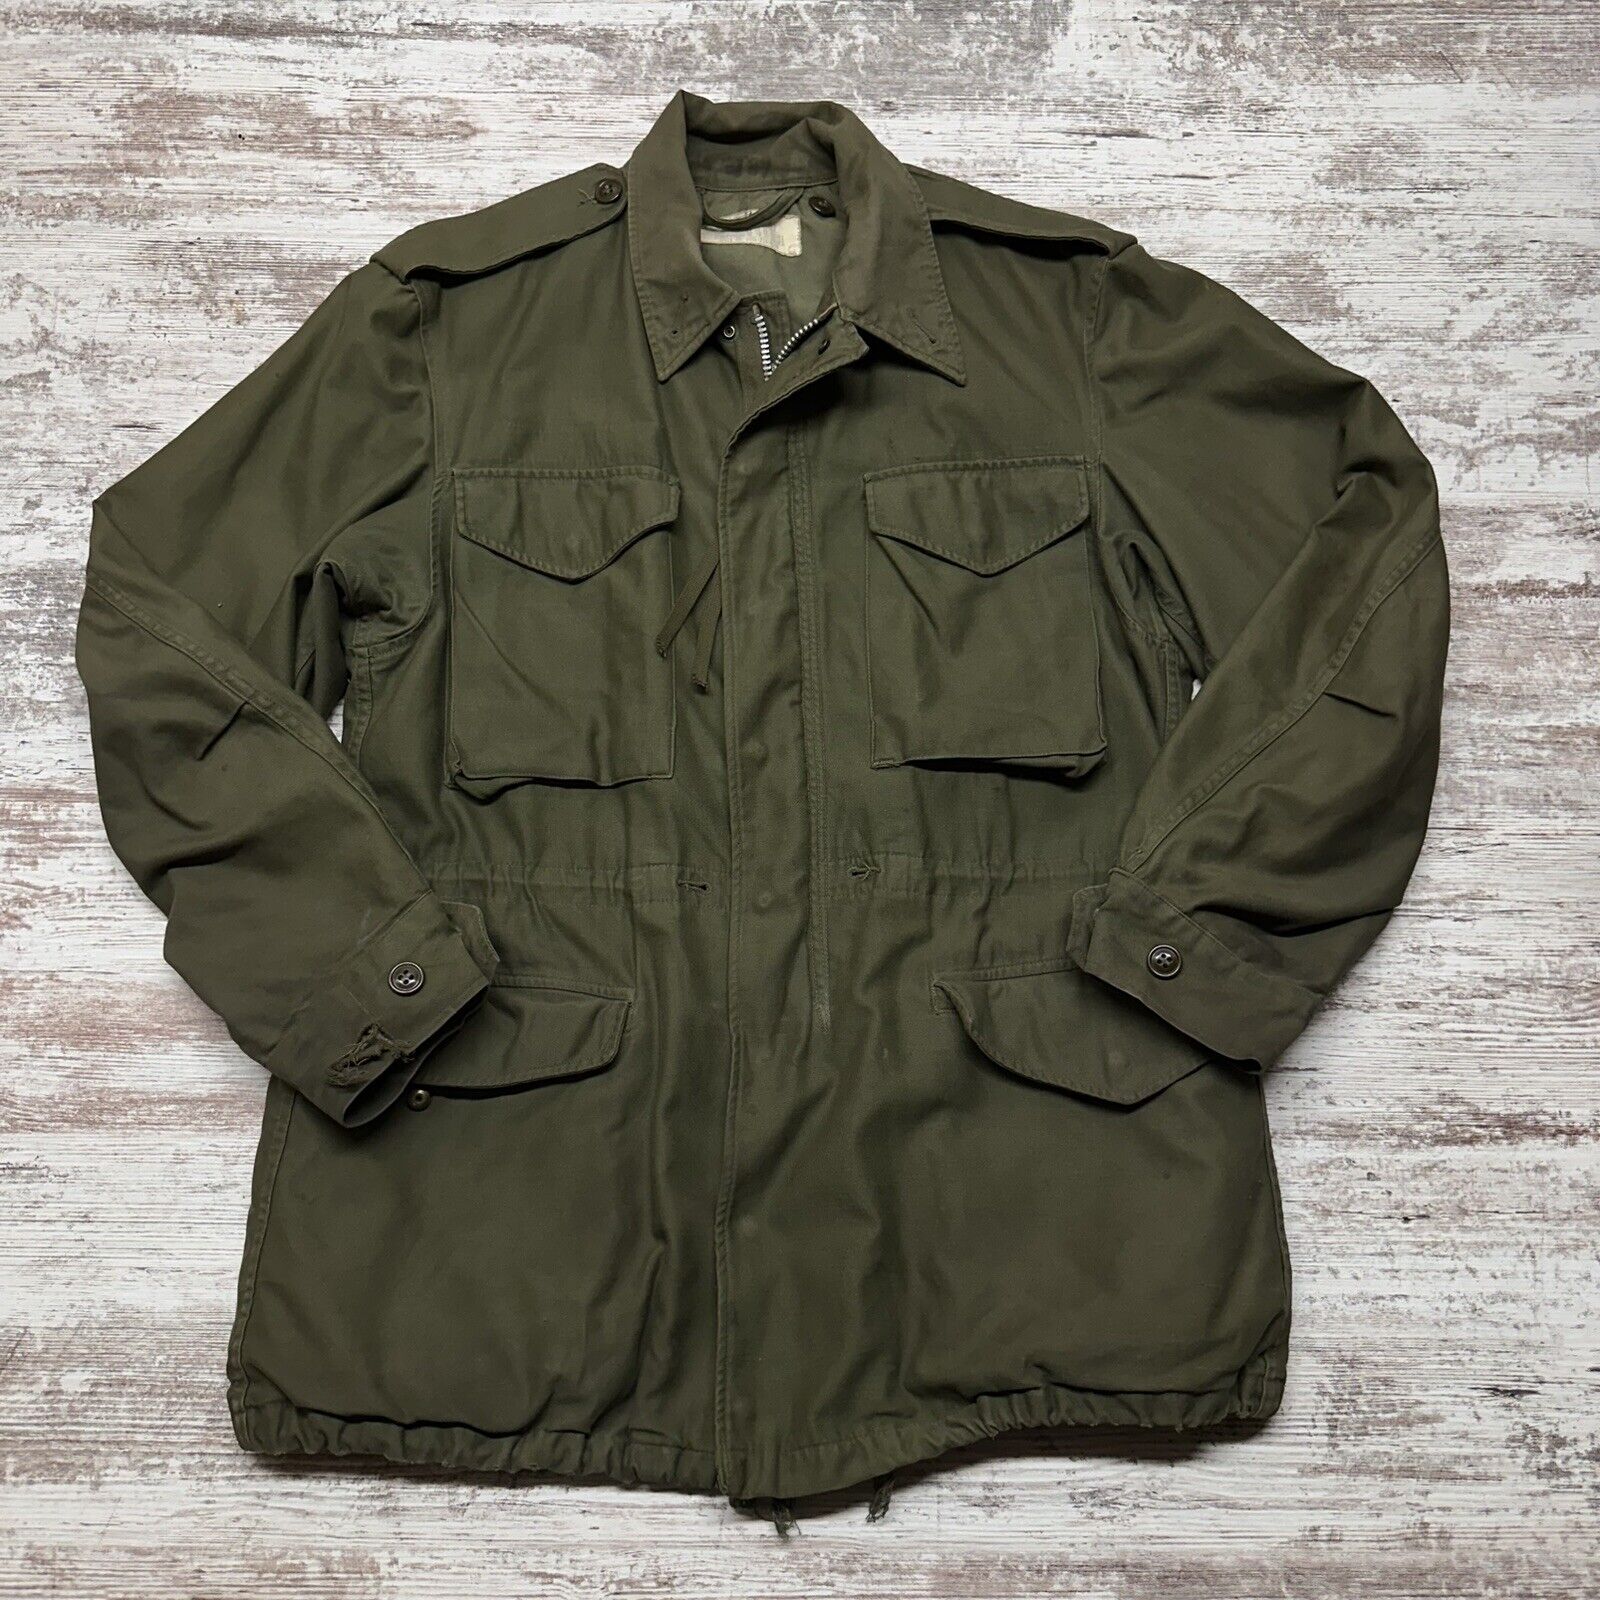 Vintage Military Jacket Mens Small Green OG 107 M65 Field Coat Cold Weather